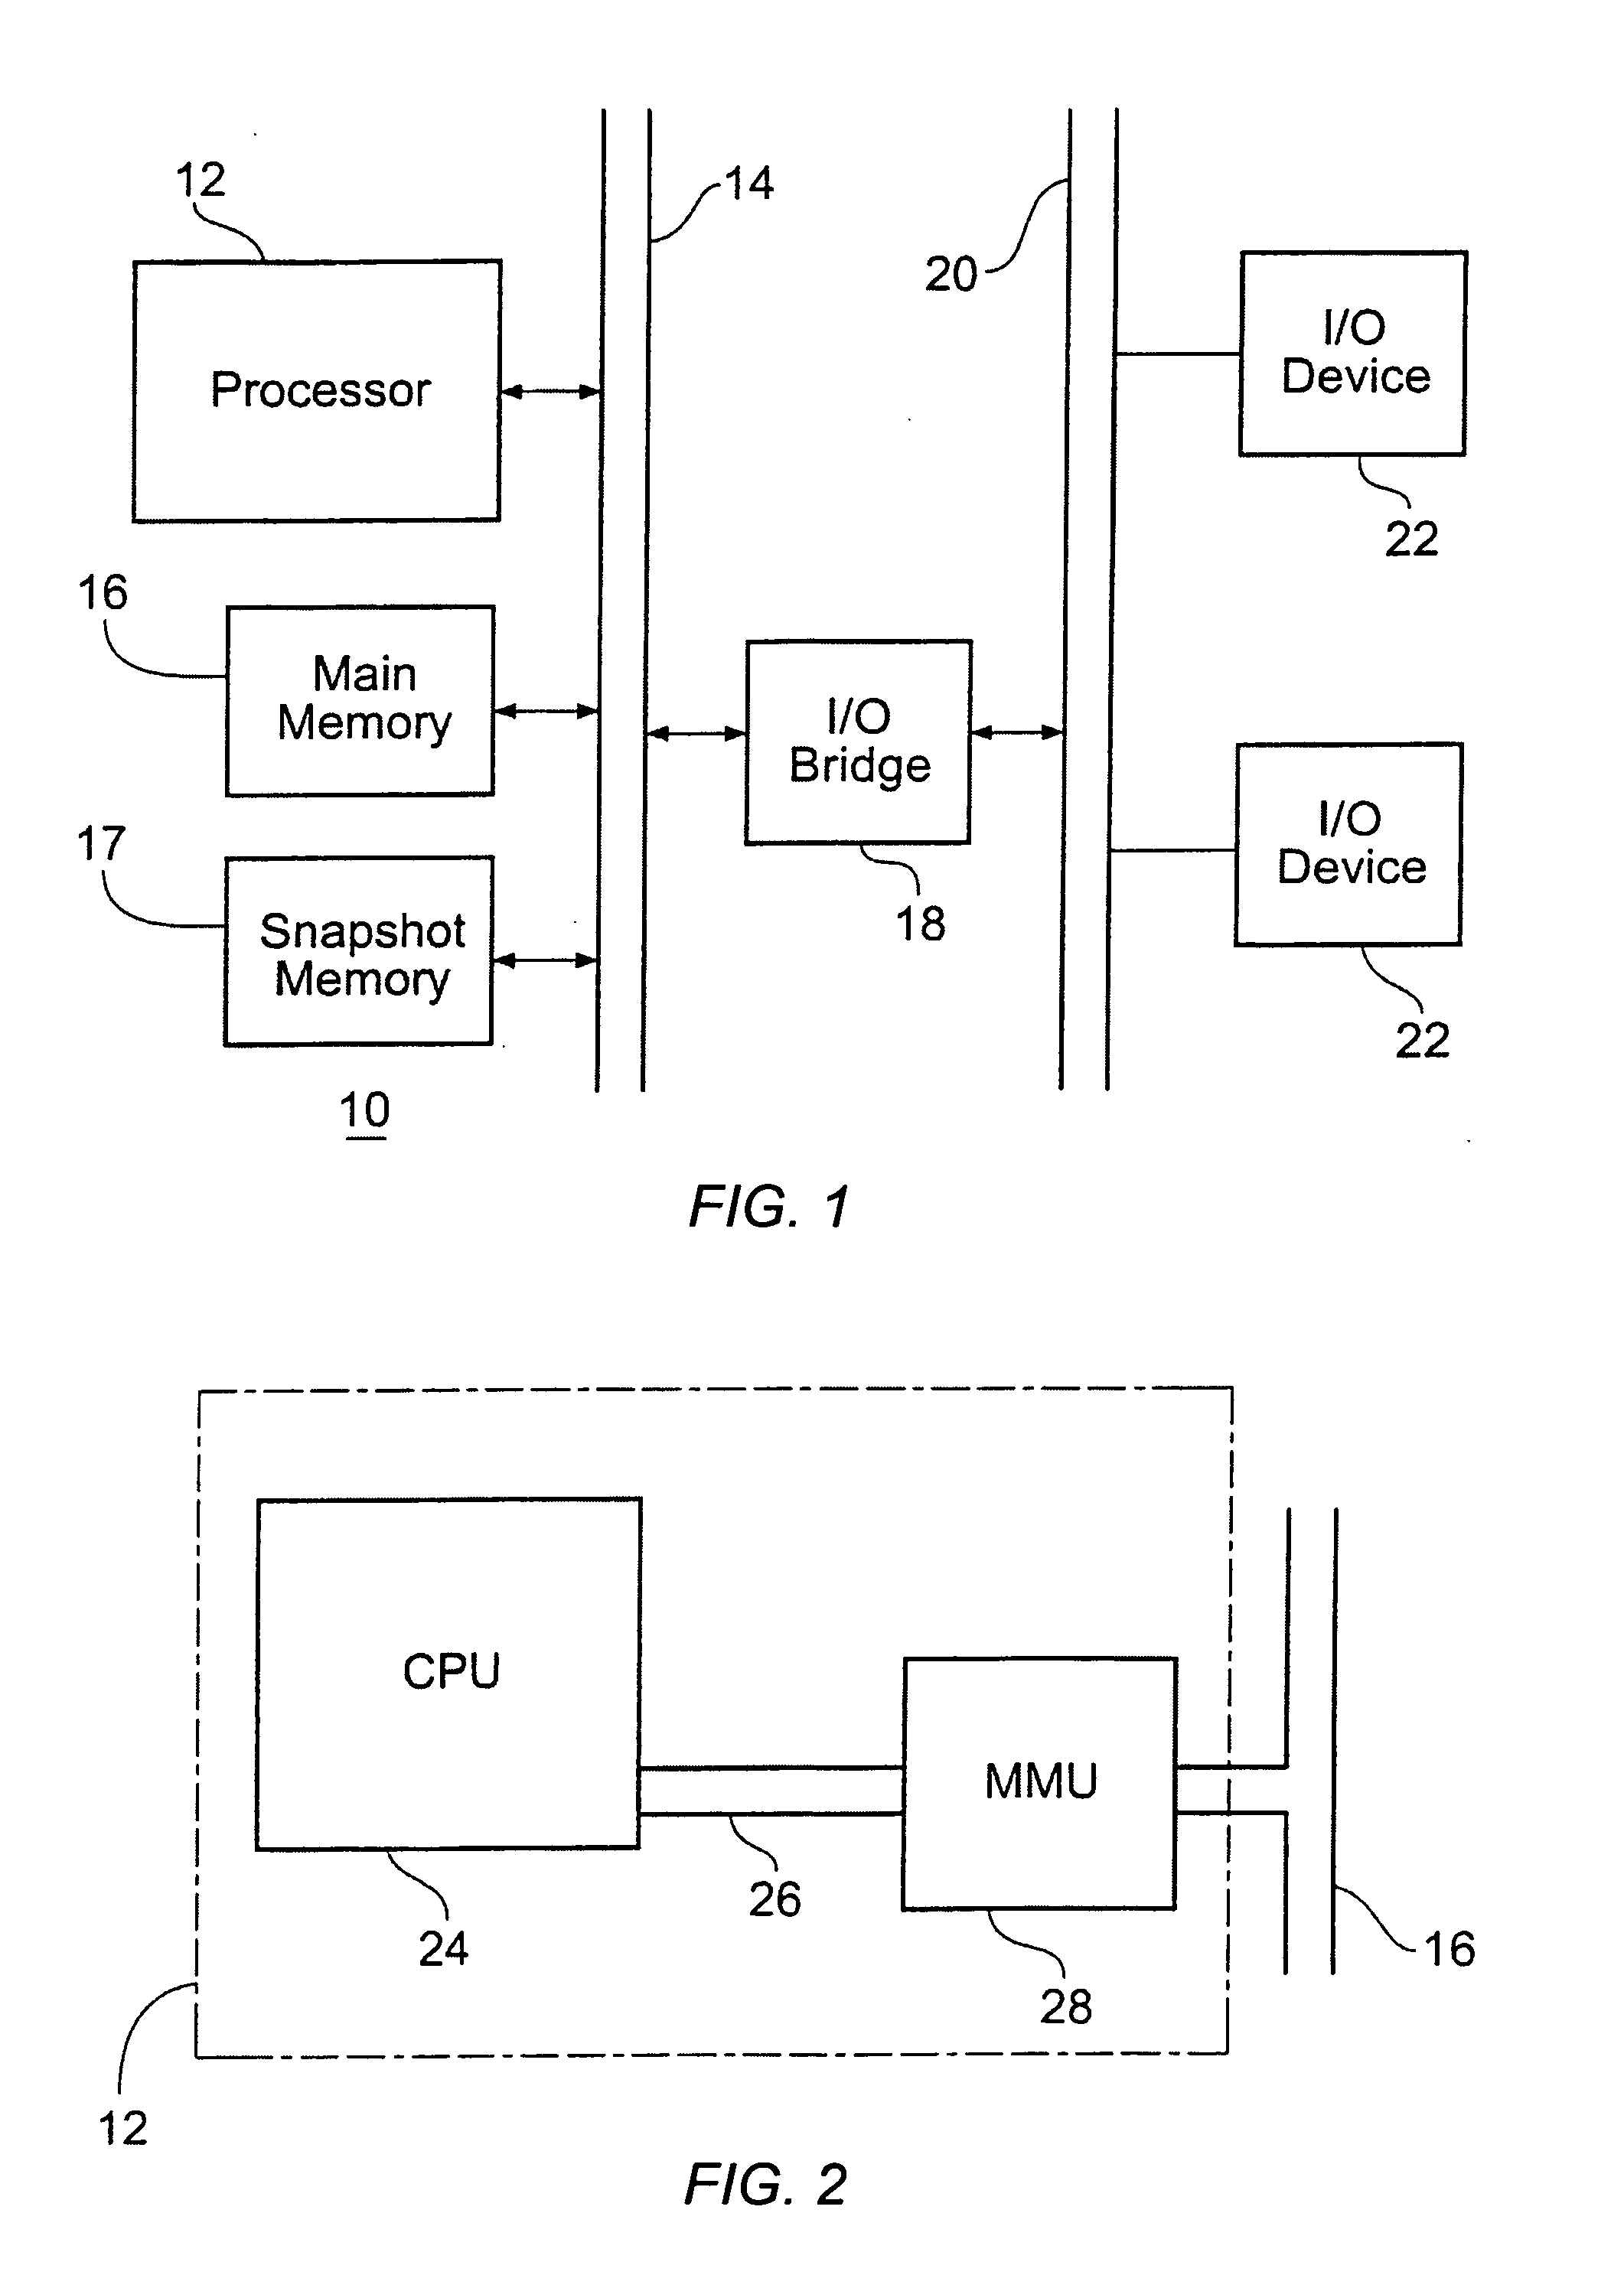 Method and mechanism for generating a live snapshot in a computing system